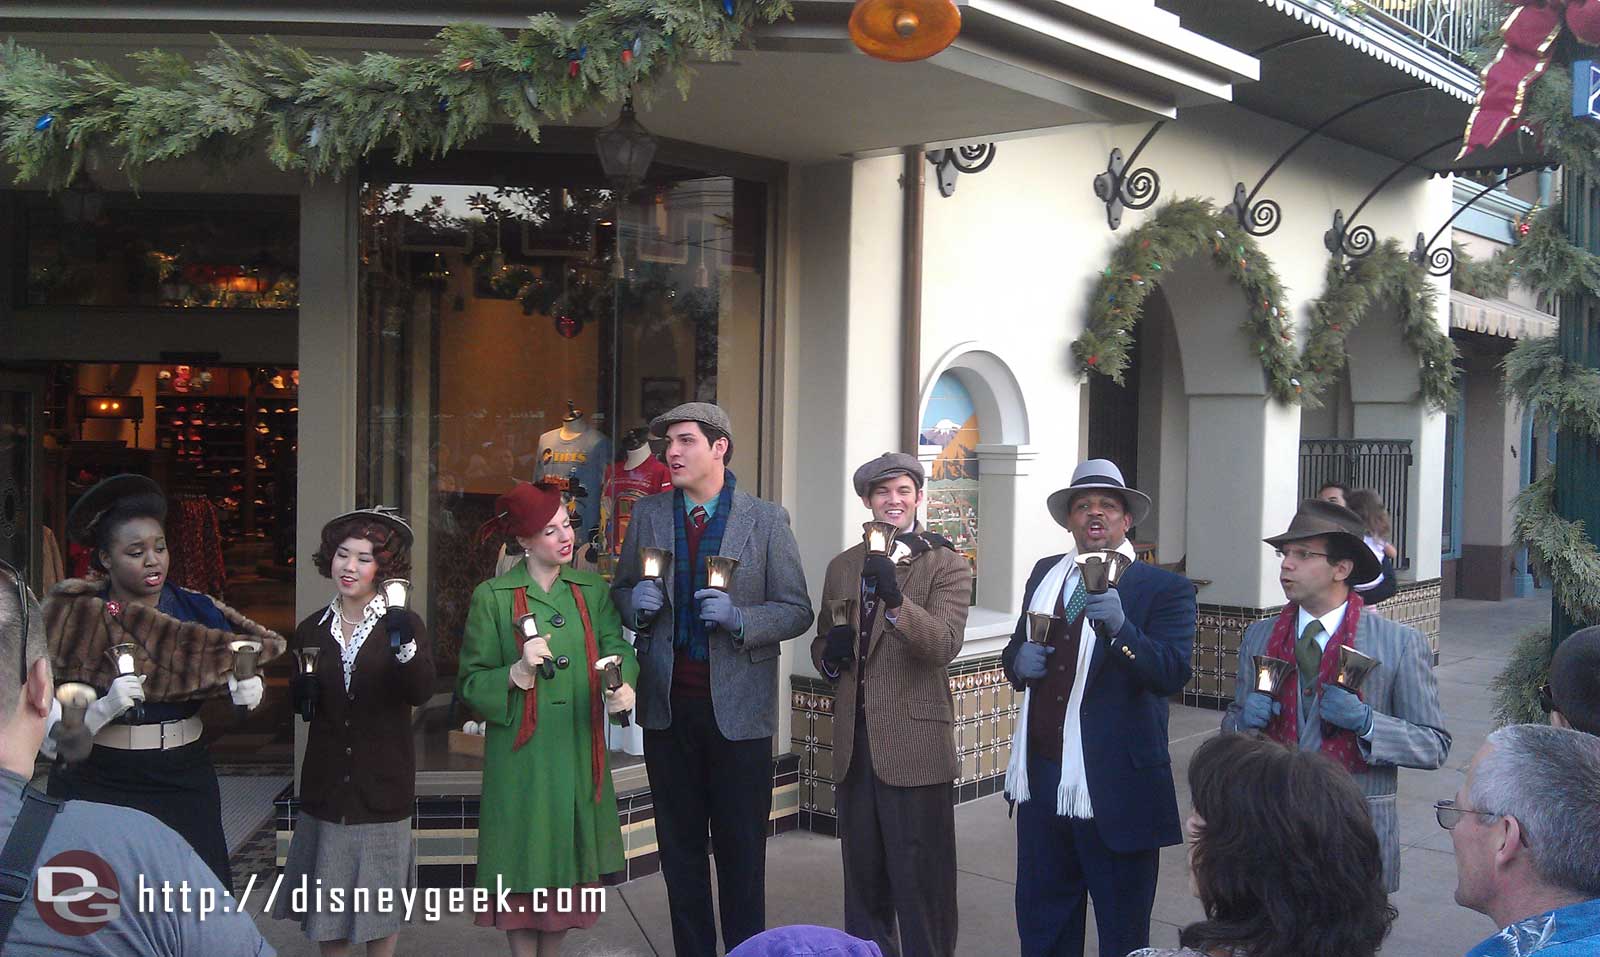 The Buena Vista Street Community Bell Ringers performing in front of the Los Feliz Five Dime